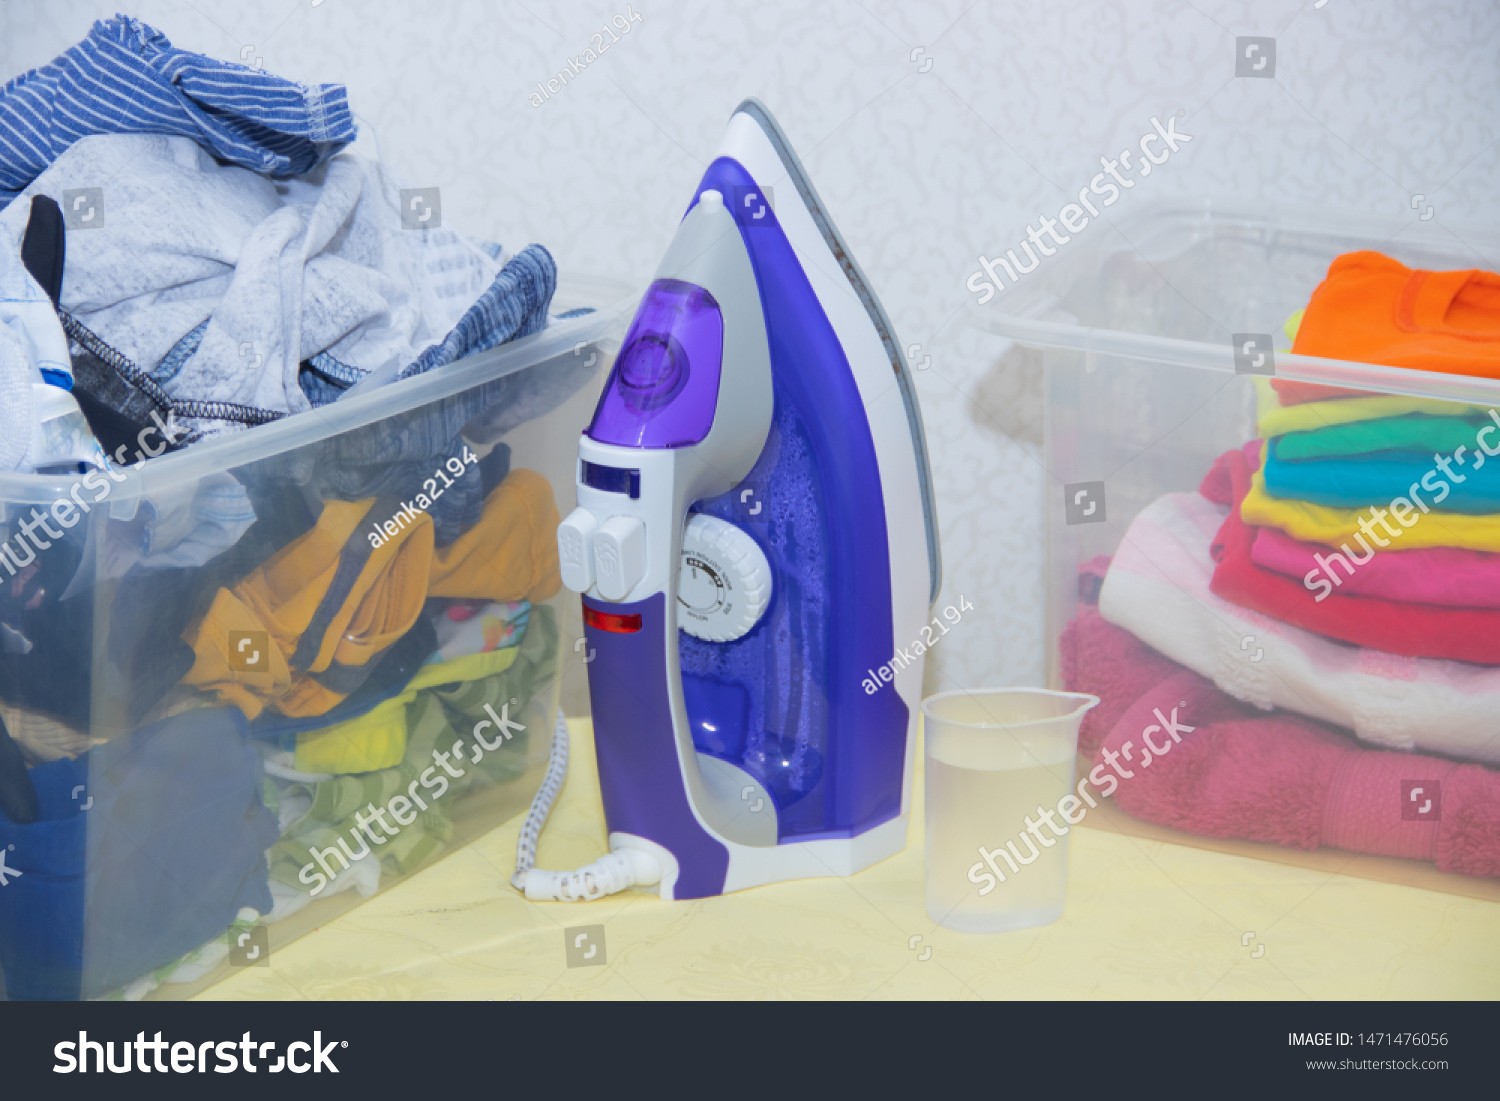 Iron and baby clothes. Colored clothes on an ironing board. Bright t-shirts. Ironed and non-ironed colored children's underwear on the board. Ironing board. A pile of things. #1471476056